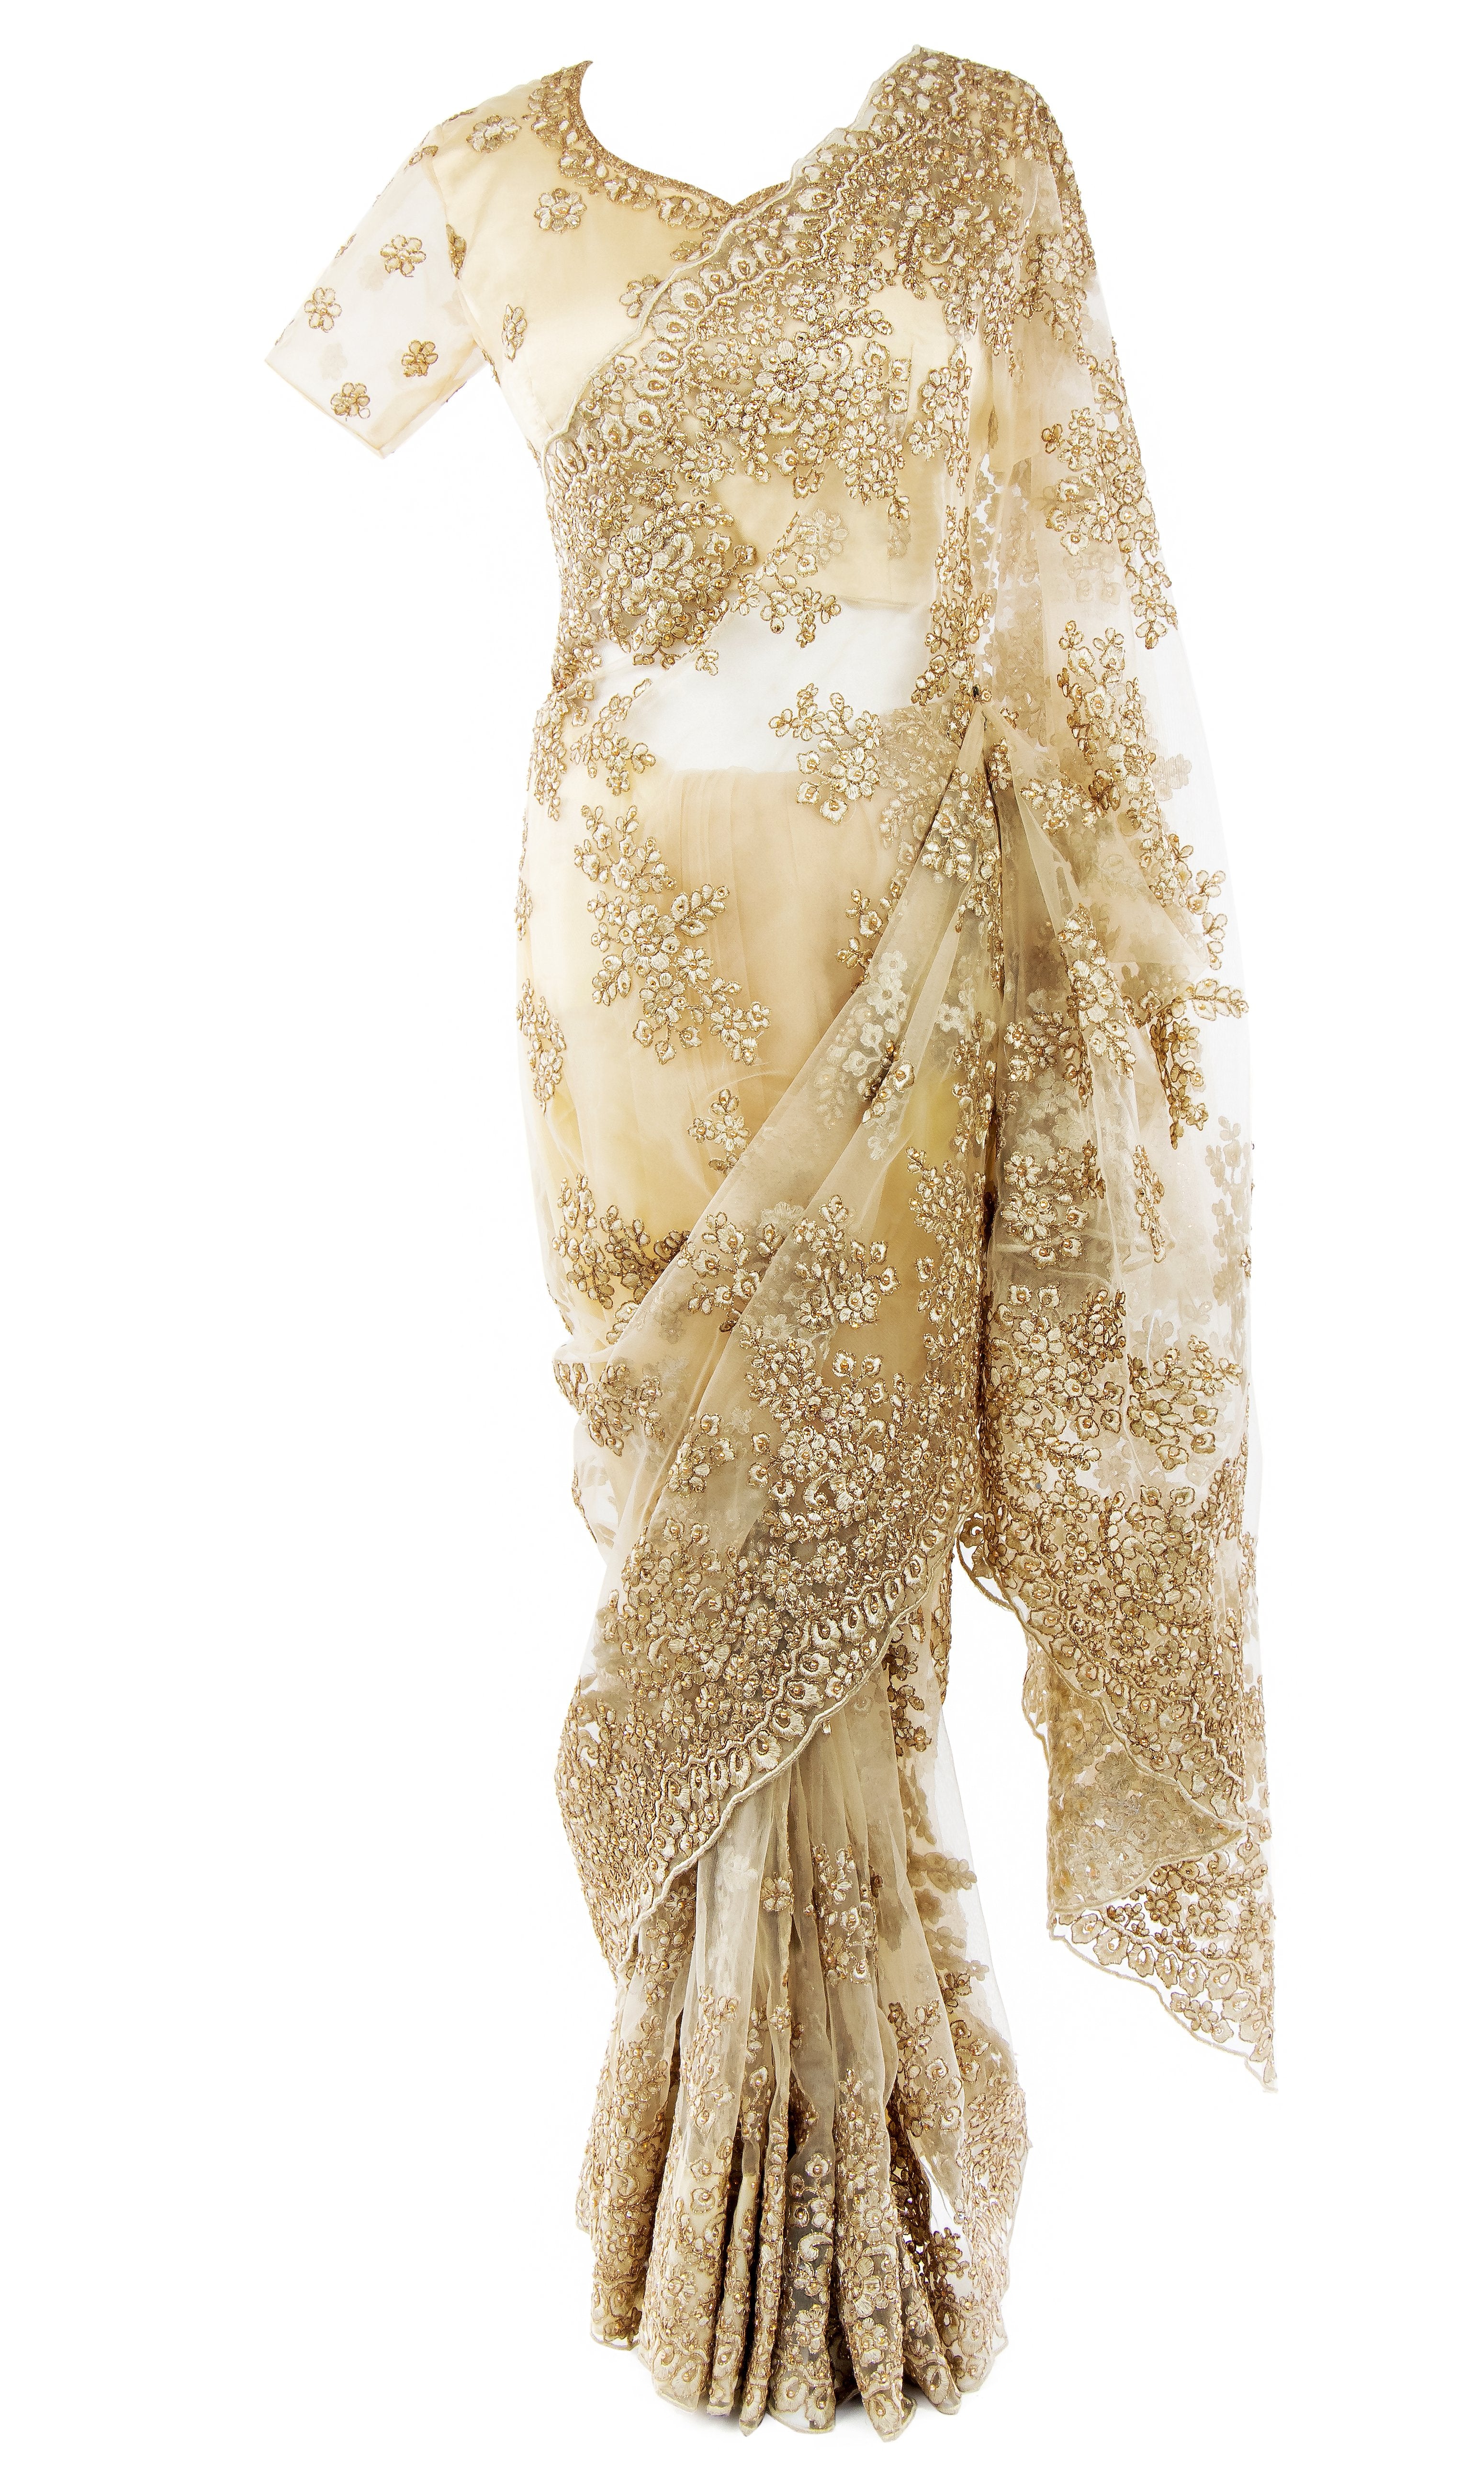 Gold net Saree Embellished with gold sequins and glitter work, stars will align.